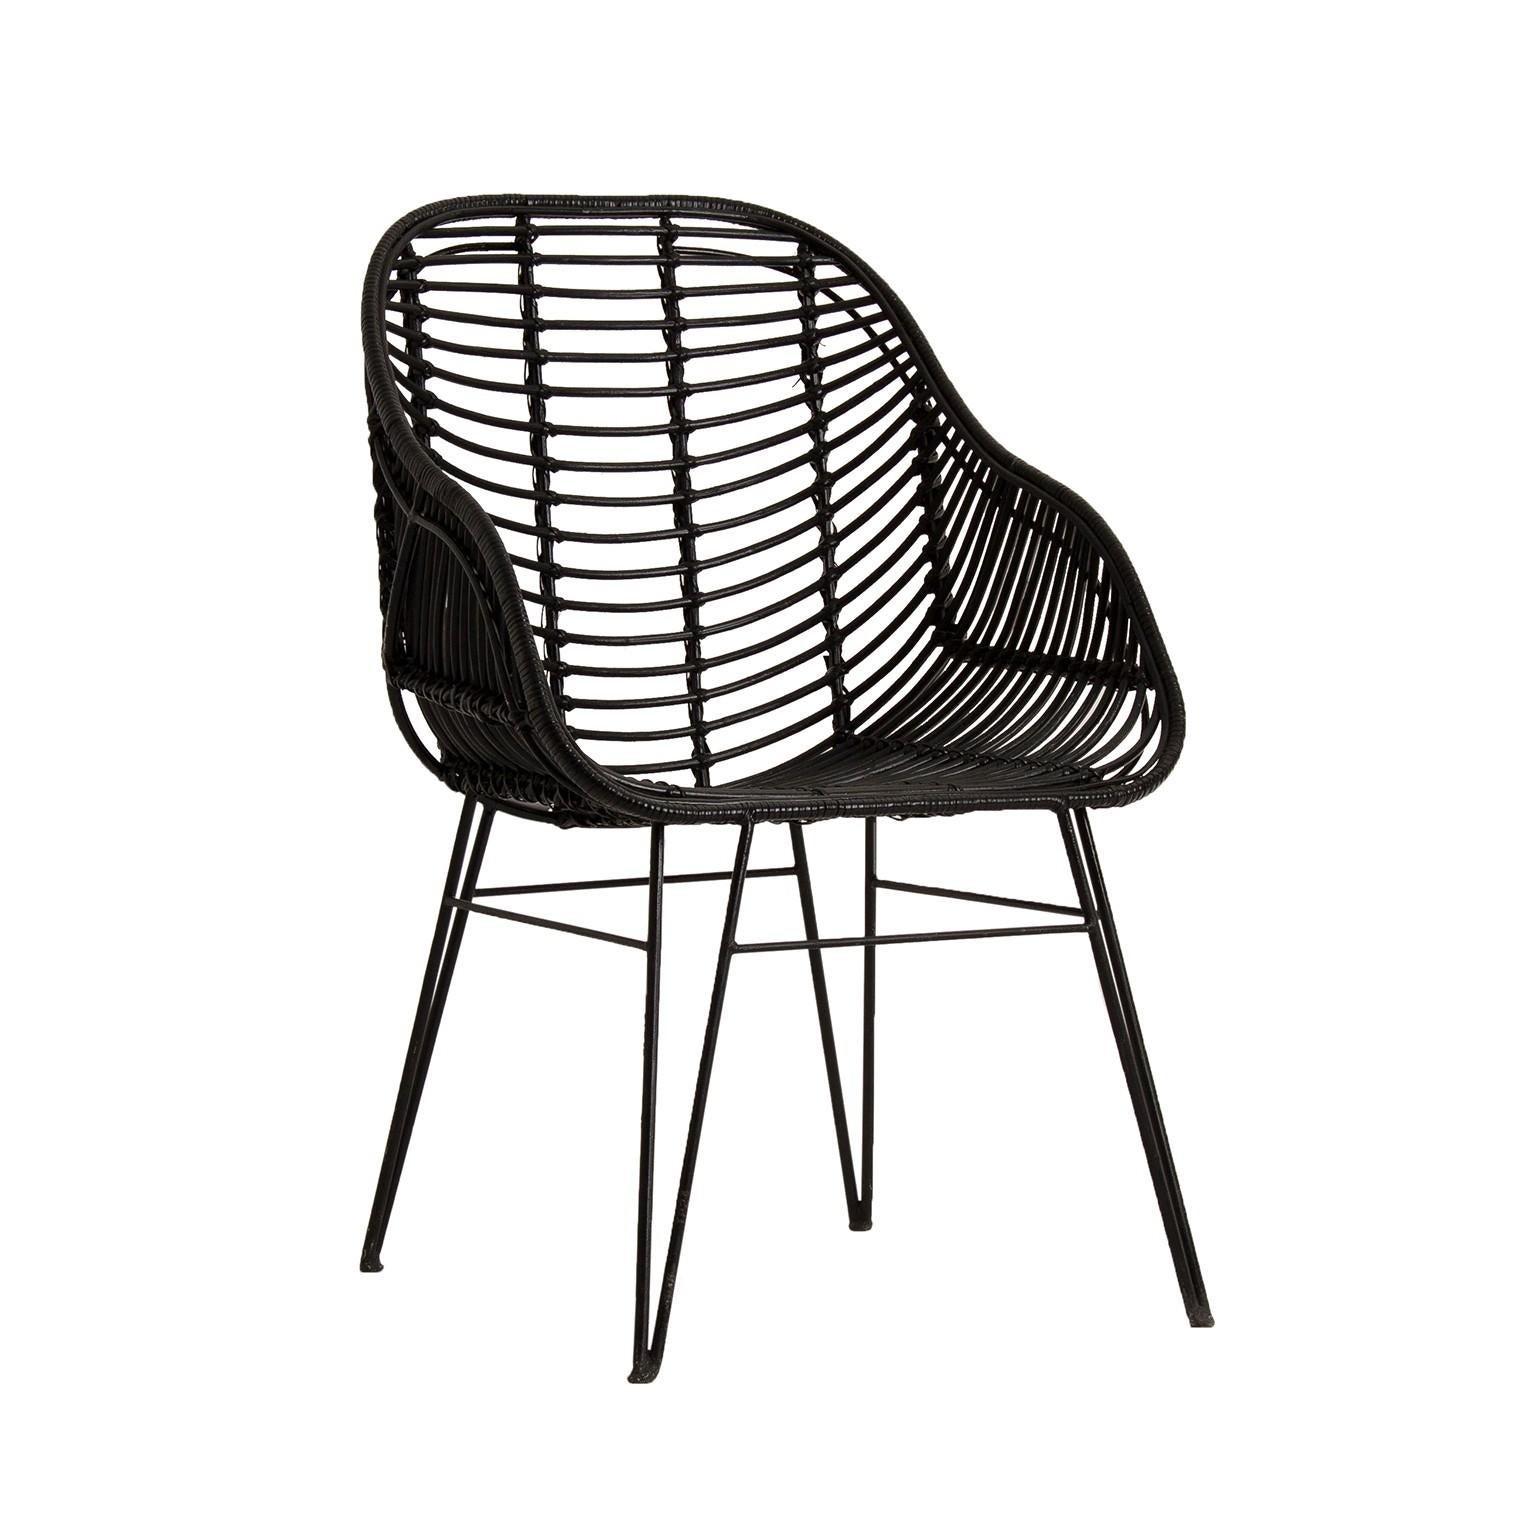 Set of six rattan and metal armchairs: aerial black laquered rattan shaped seats, on black metal feets. They will be perfect on your terrace, in your veranda, around the swimming POOL or the dining table. Poetic, elegant and aerial. All in excellent